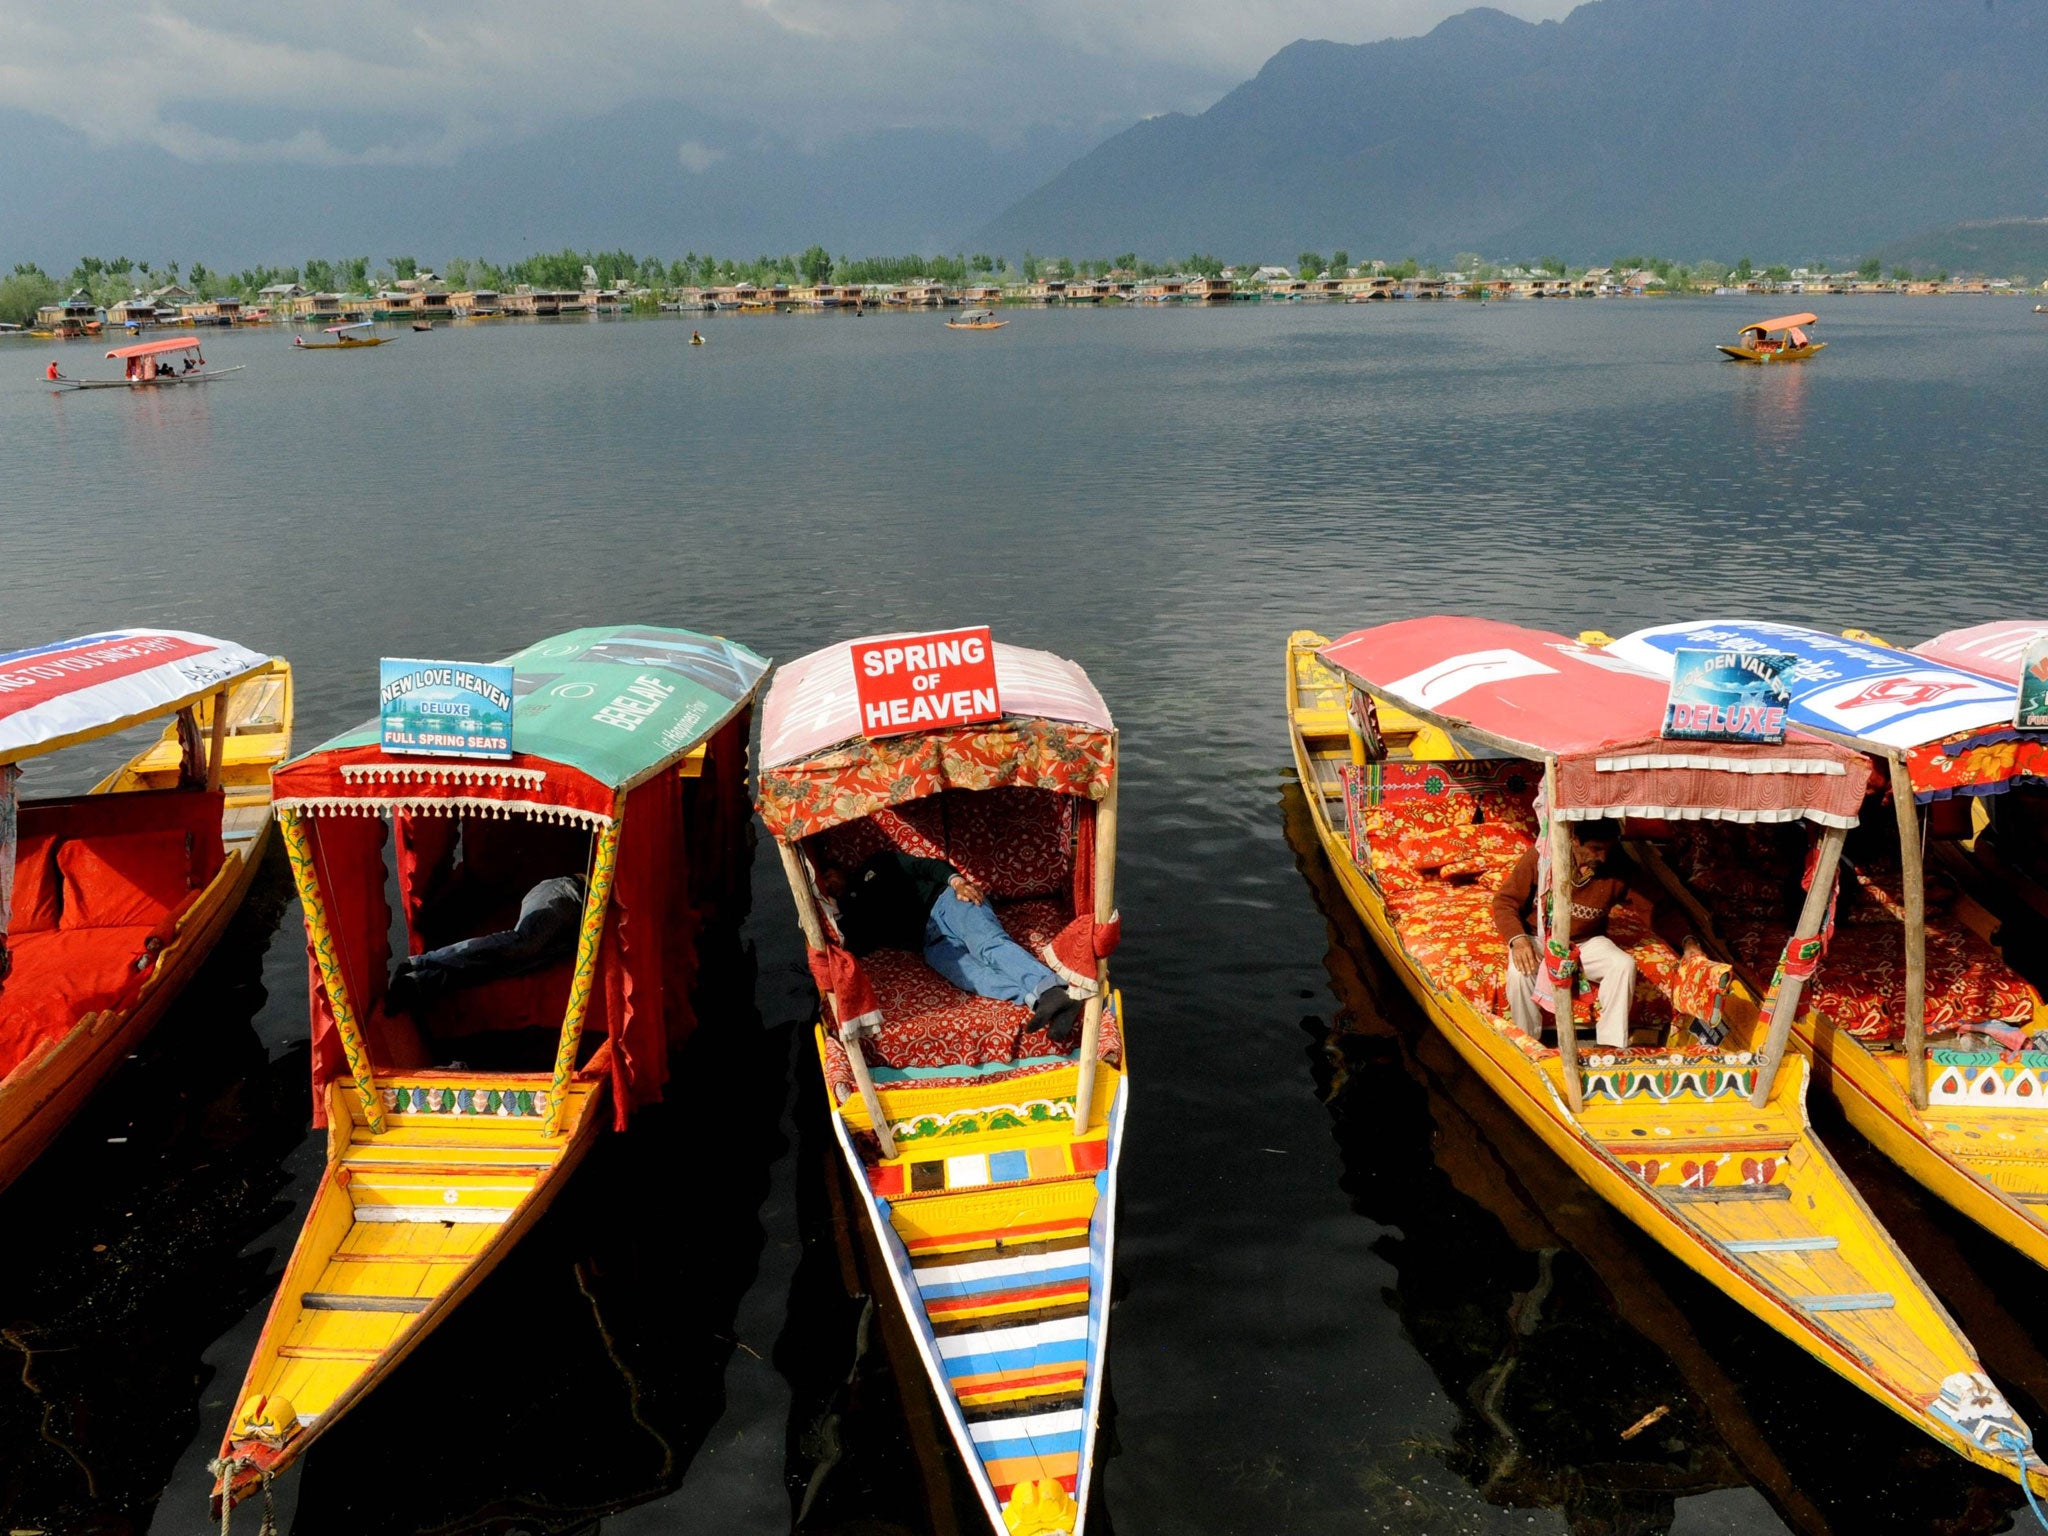 New horizons: The advisory against Srinagar in Kashmir has been lifted, opening this region to tourists again